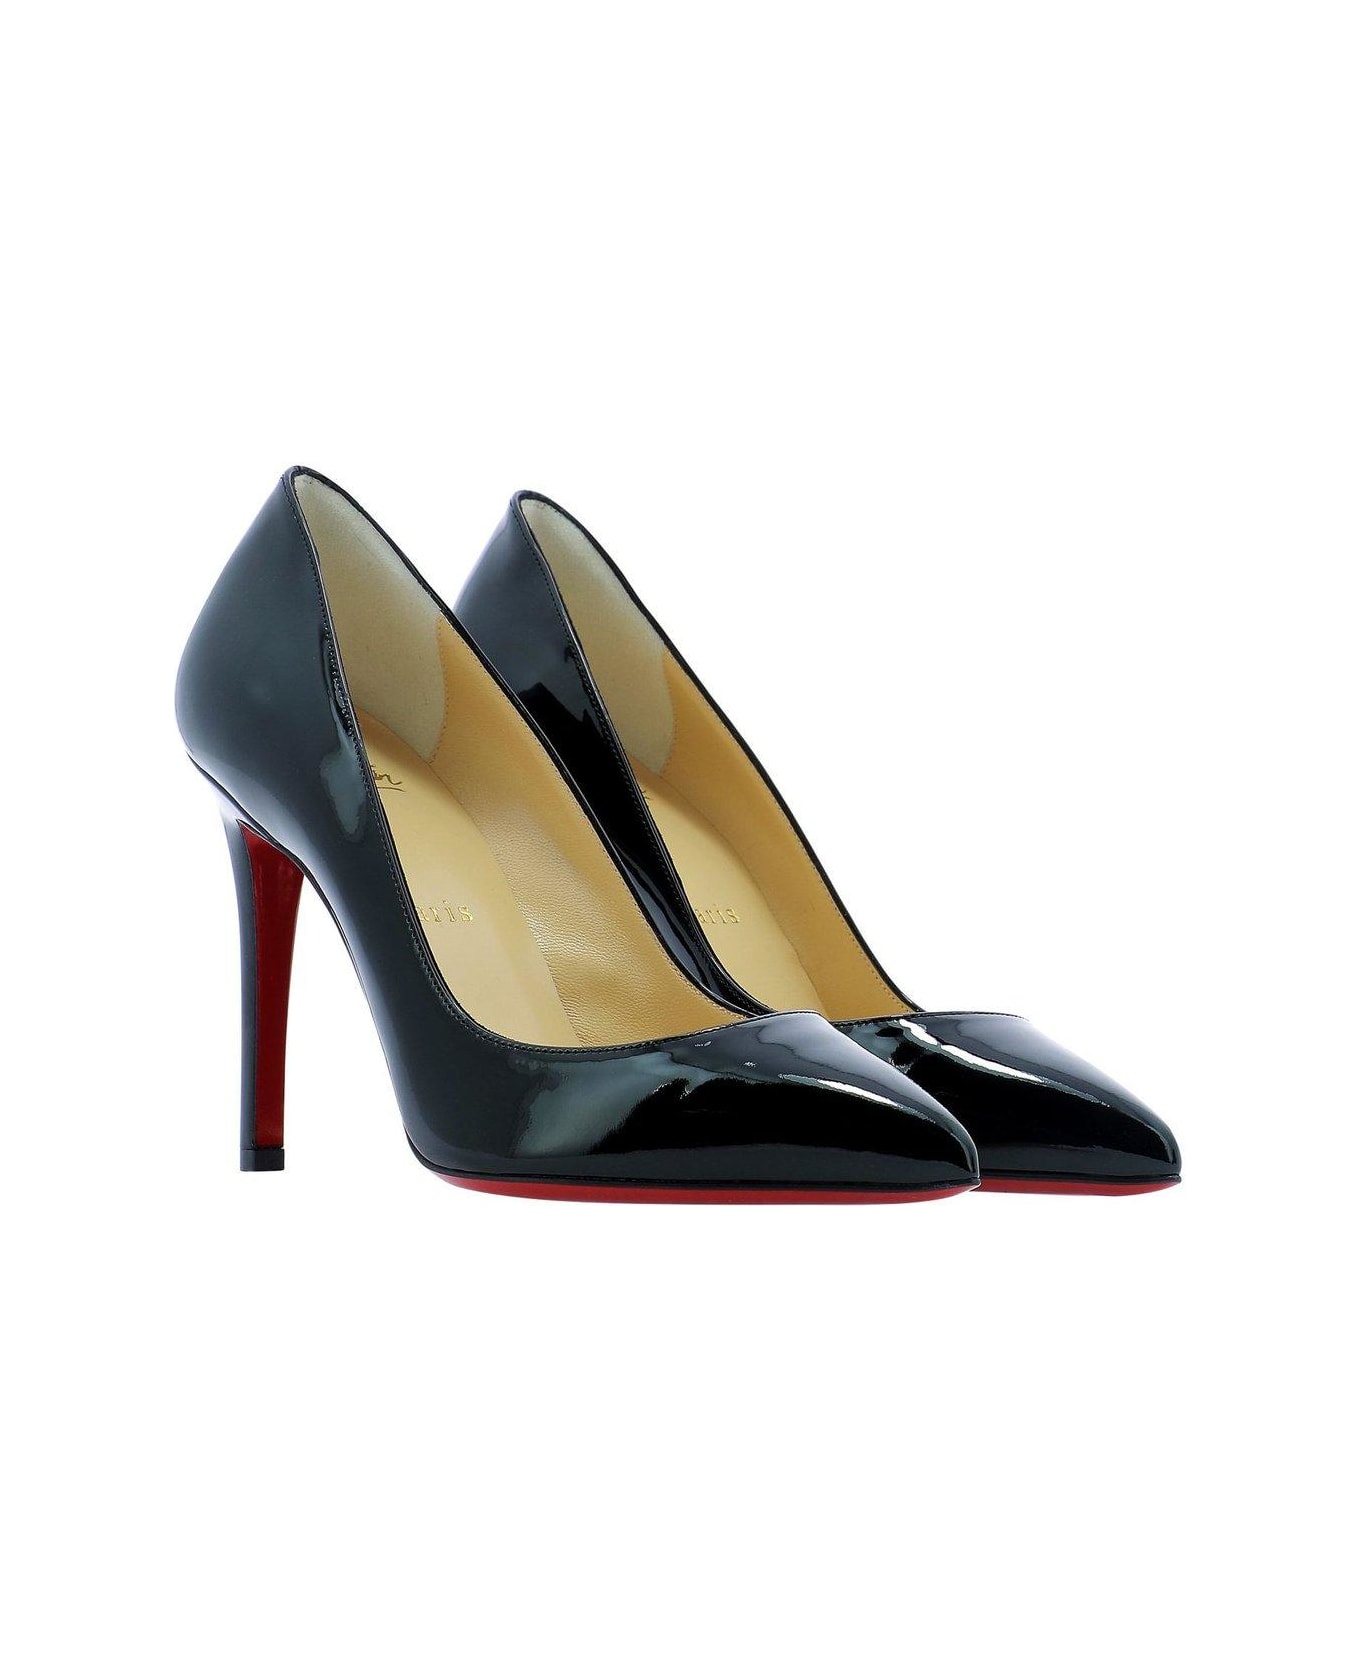 Christian Louboutin Pigalle Pointed Toe Pumps - Black ハイヒール